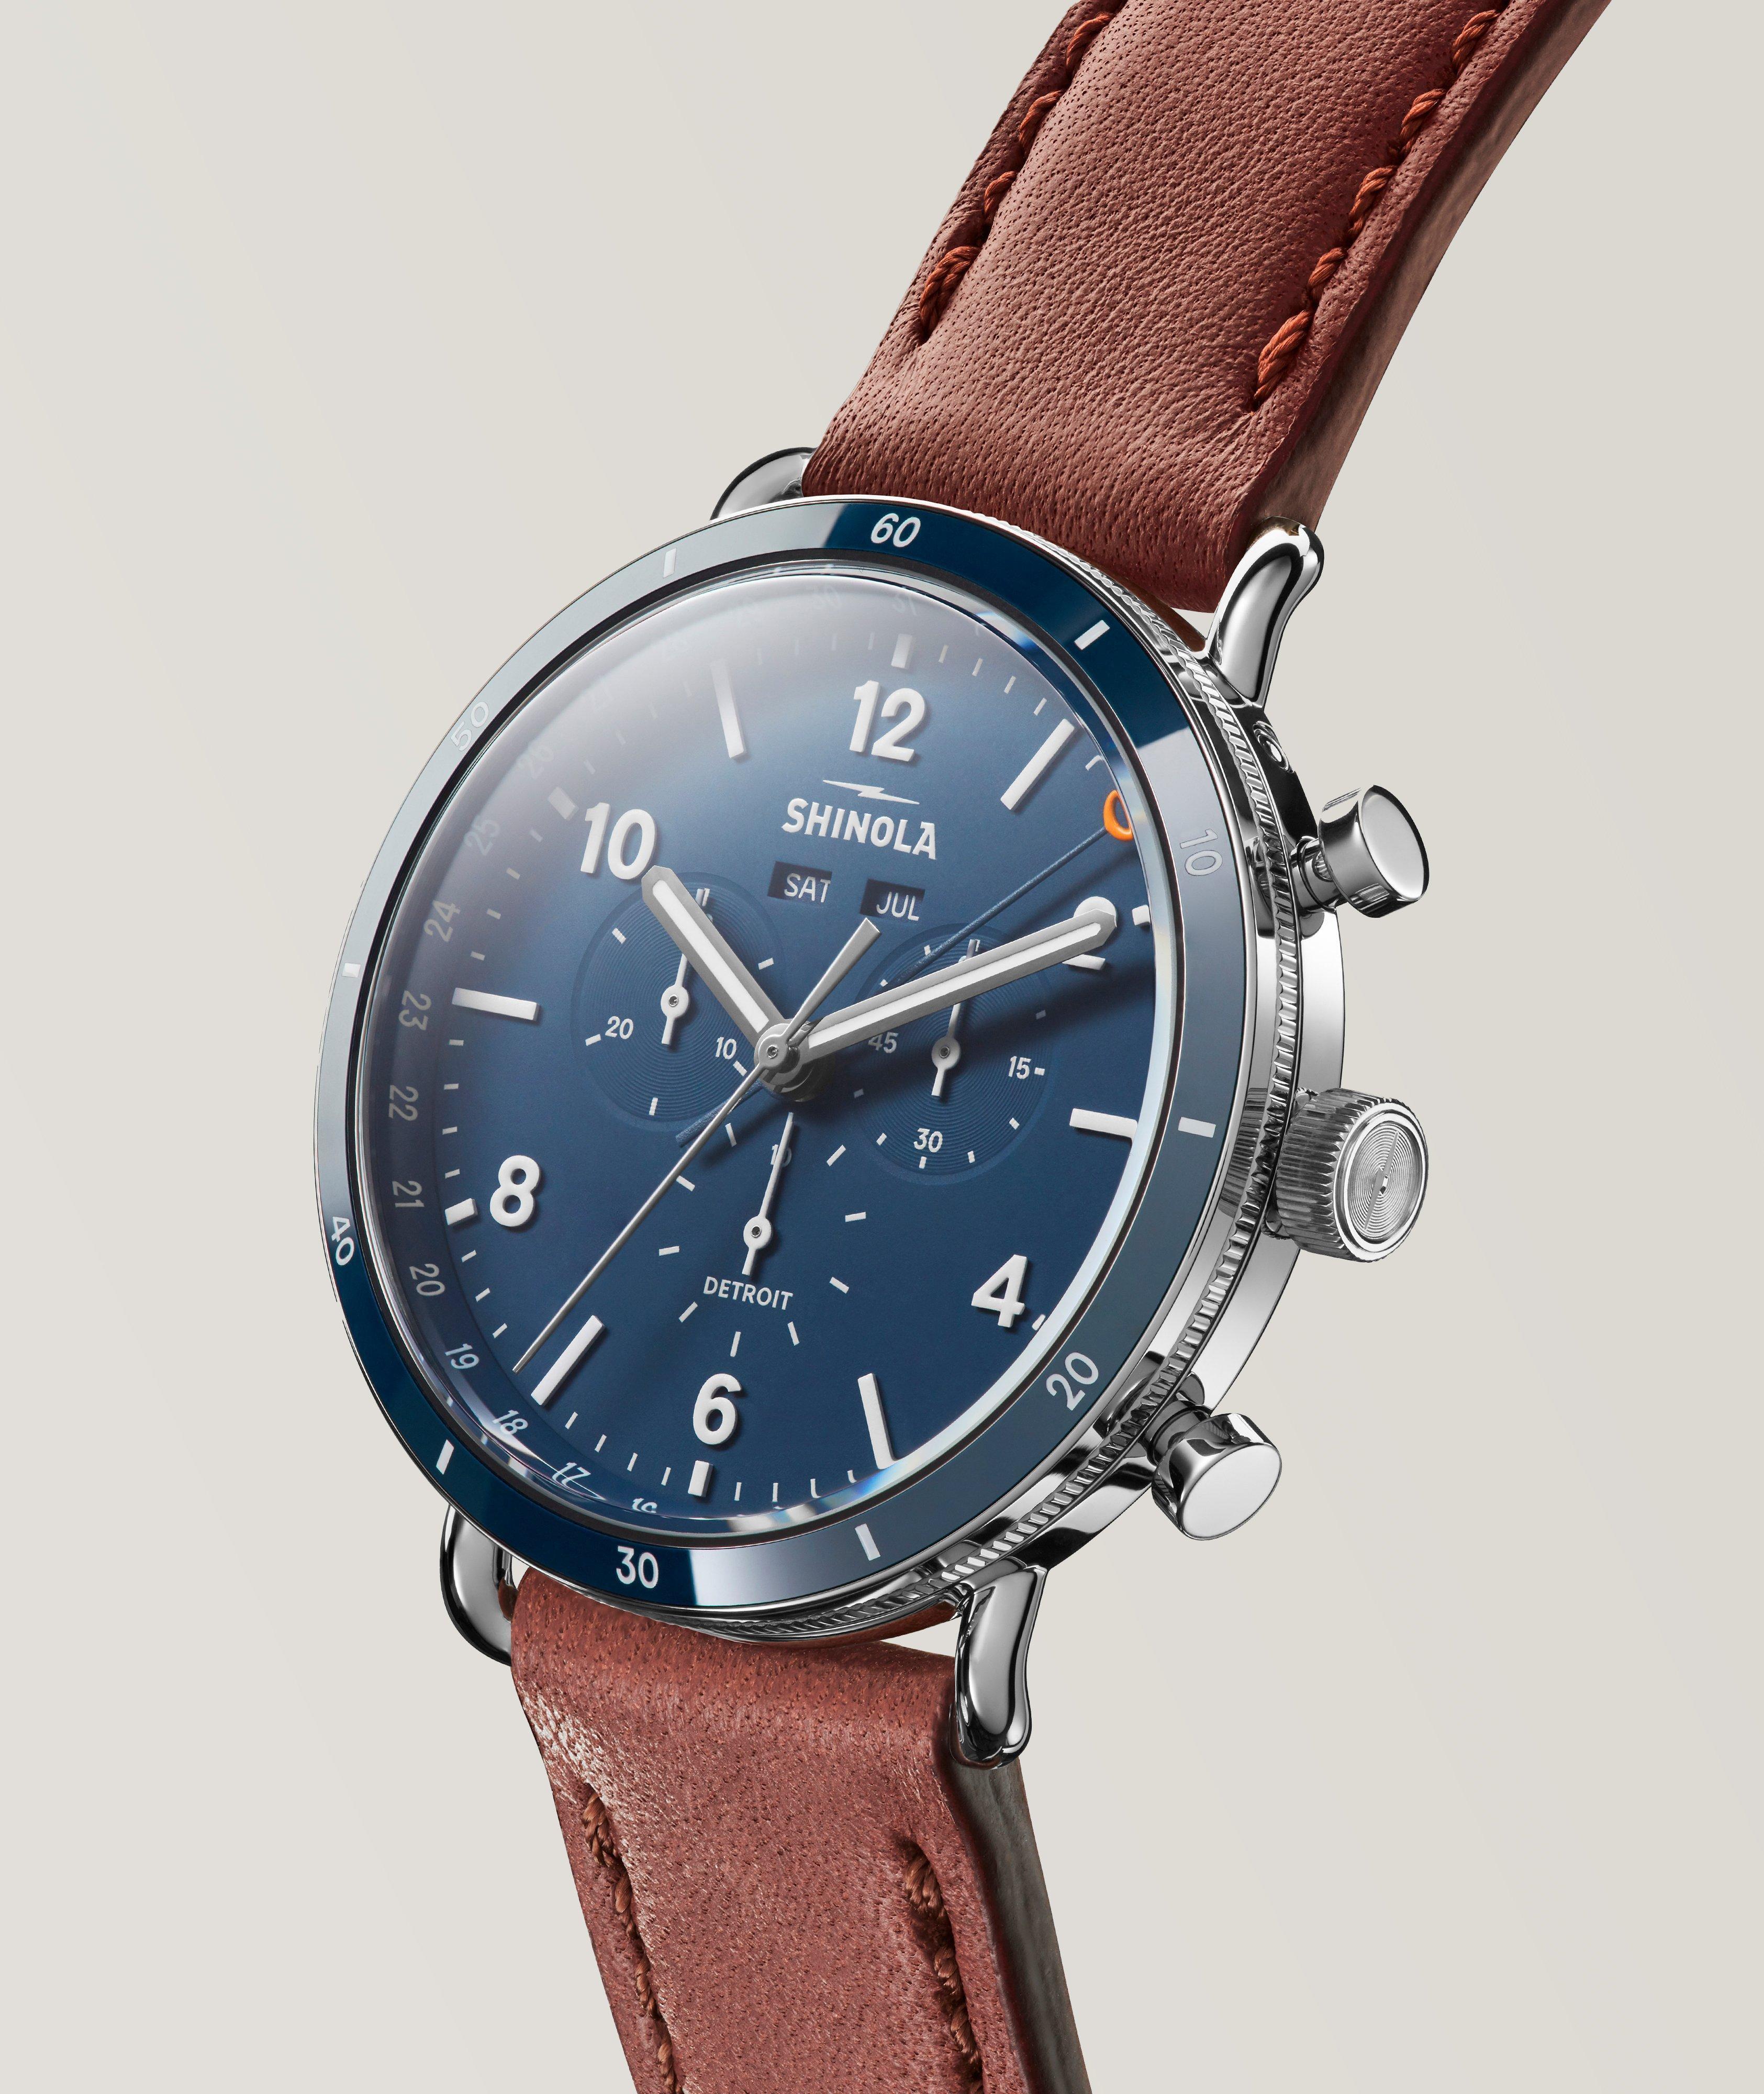 Canfield Sport Watch image 1